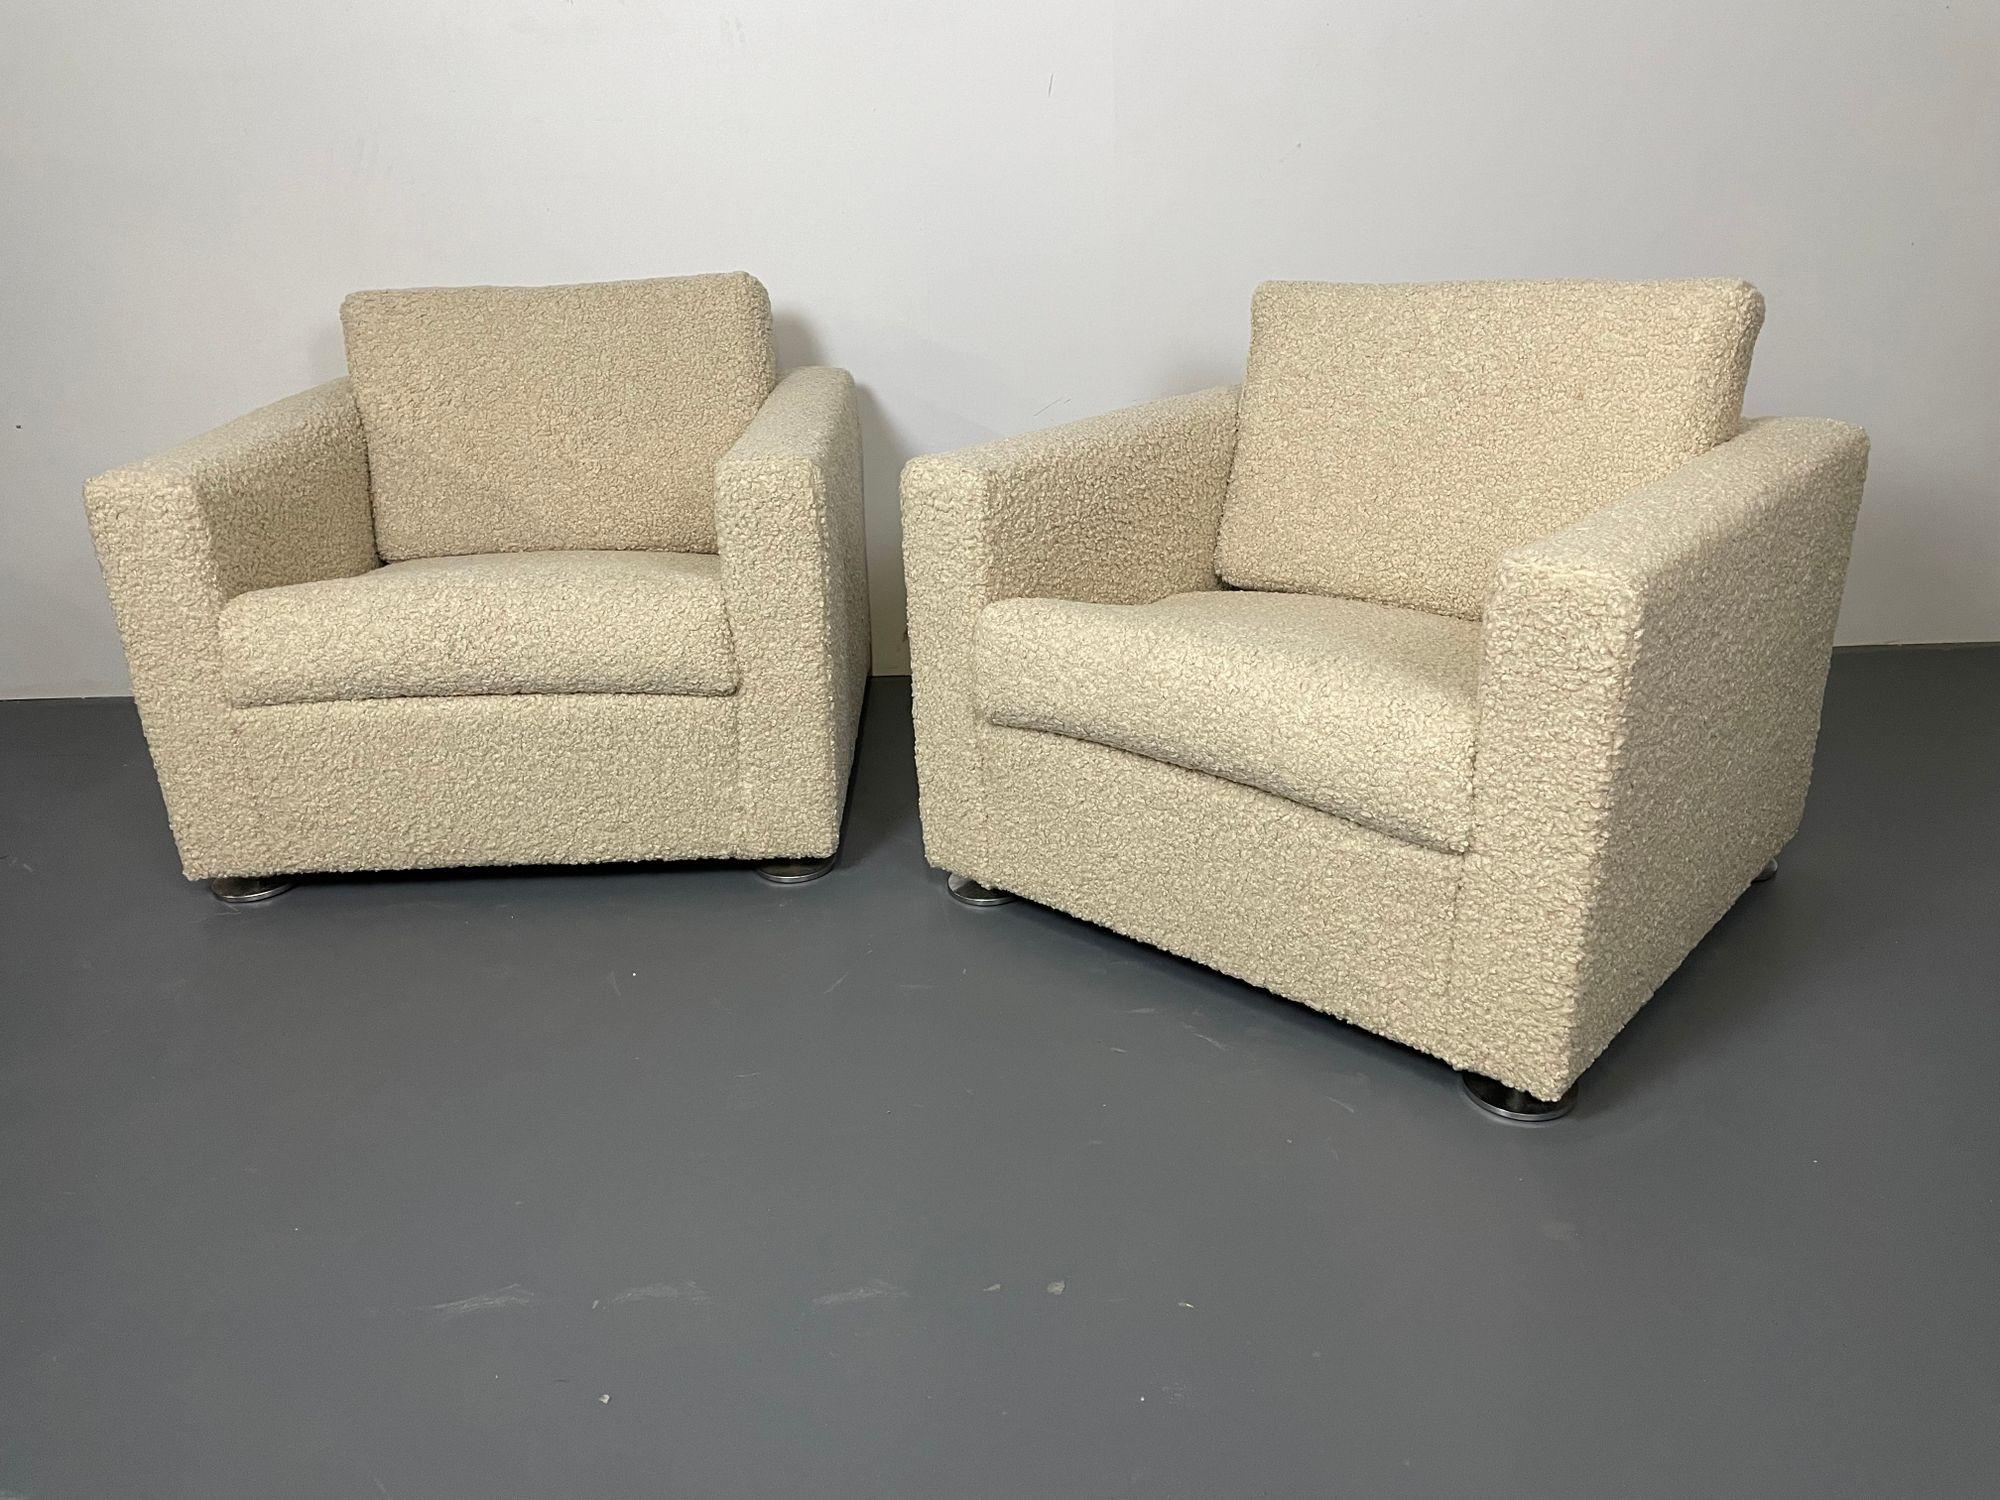 Pair Stendig Arm Chairs, Switzerland, New Luxurious Boucle, Mid-Century Modern In Good Condition For Sale In Stamford, CT